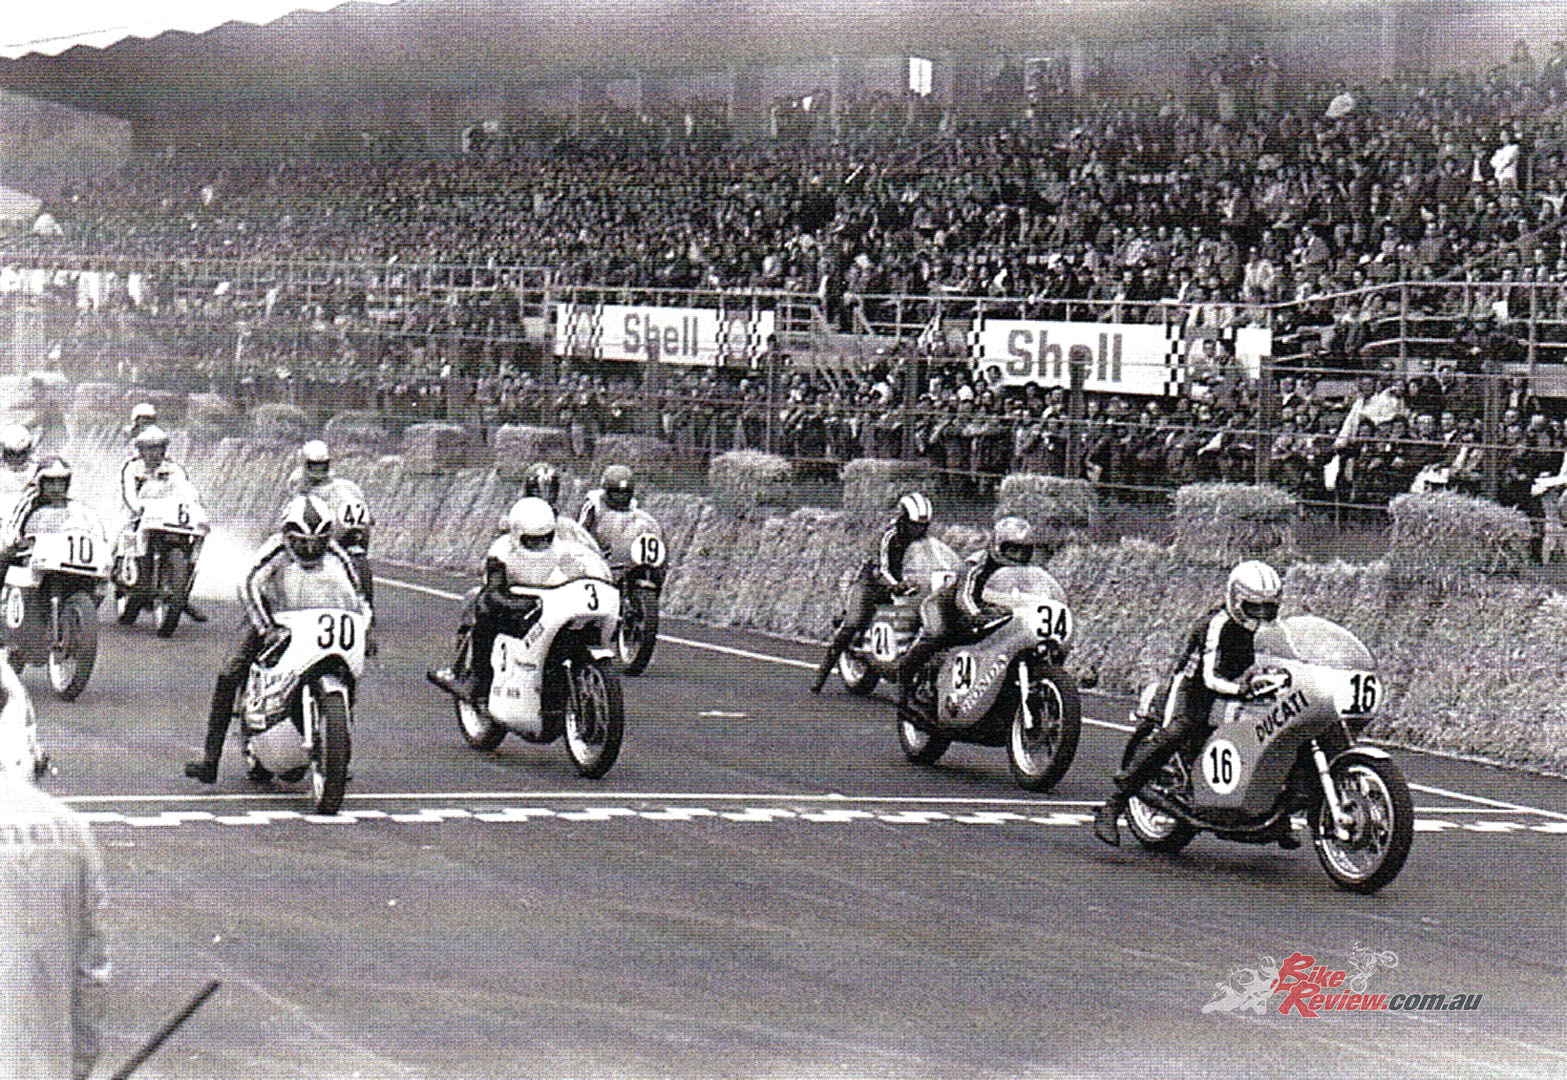 The 1972 Imola 200 start. Agostini and Spaggiari, both locals, had already taken off way before the rest of the field!